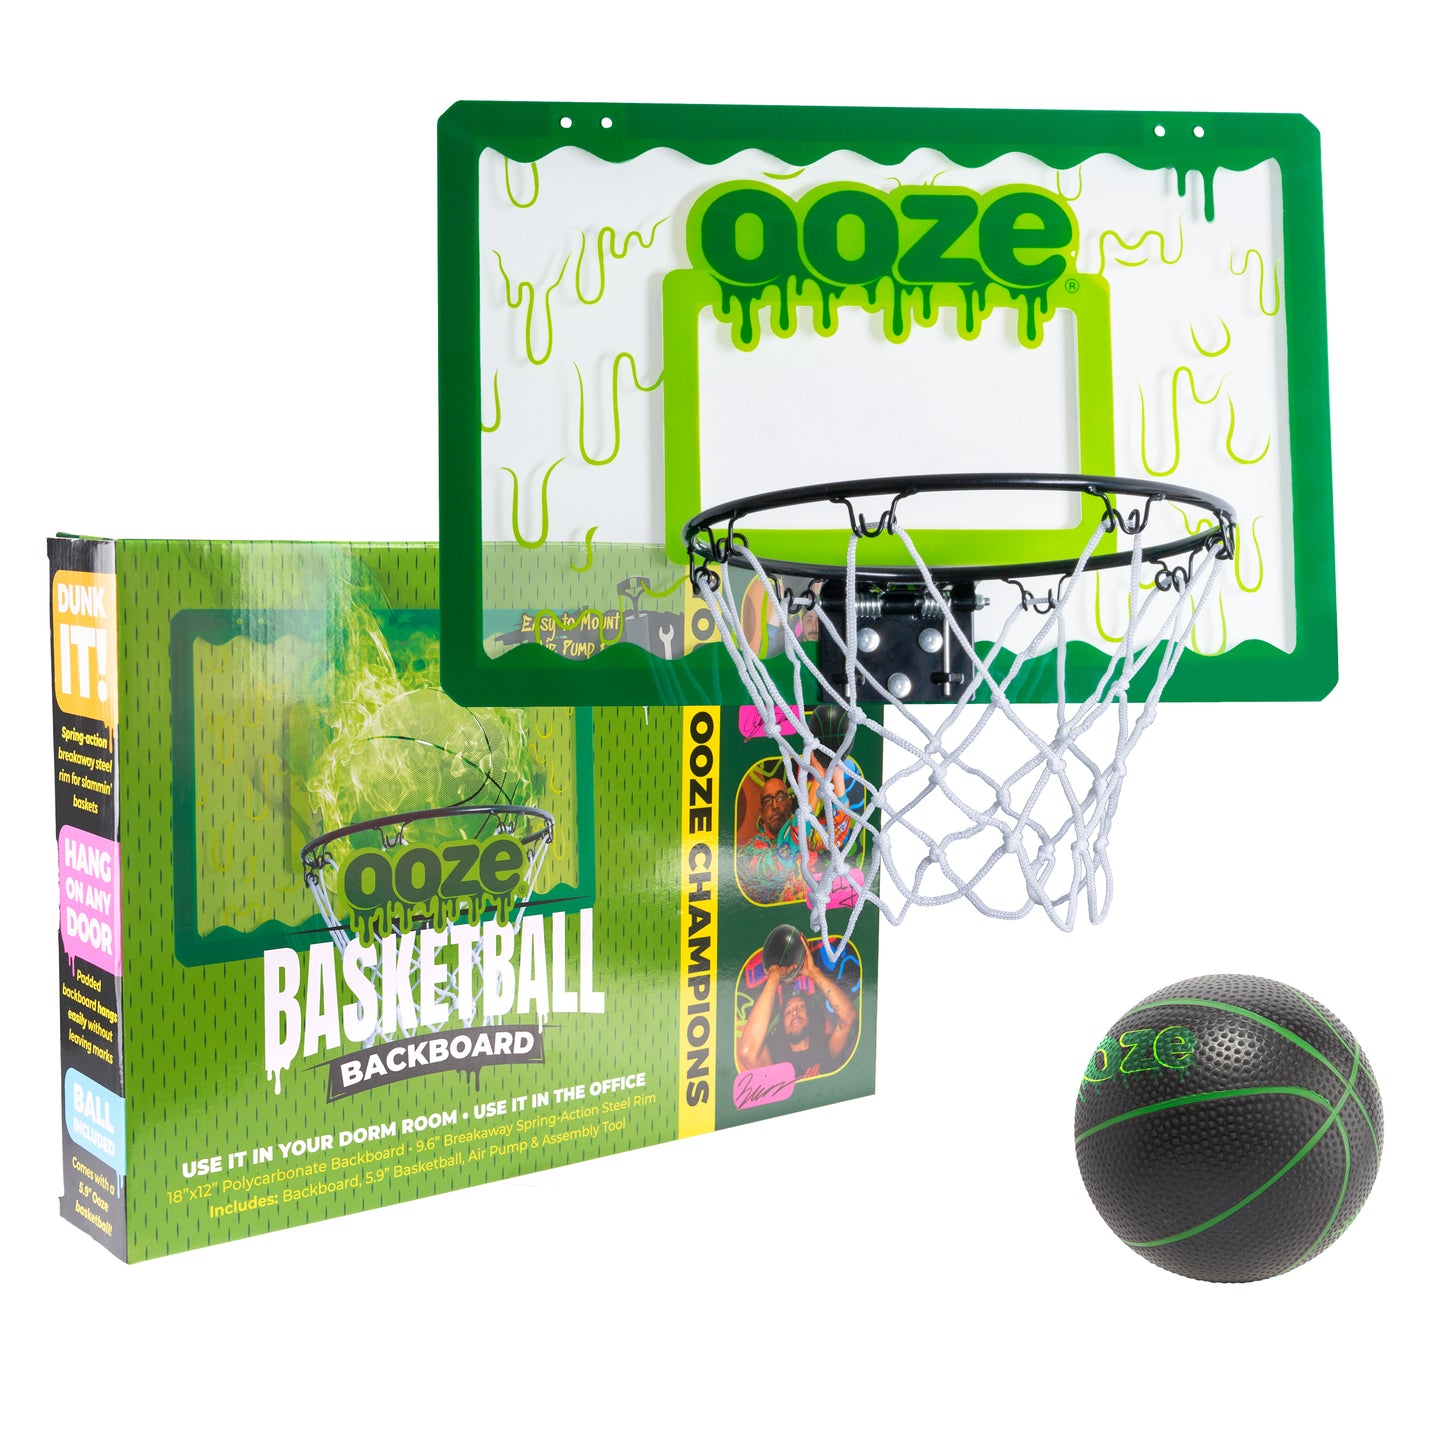 The Ooze Mini Basketball Hoop Set shows the hoop and black mini basketball next to the set's box